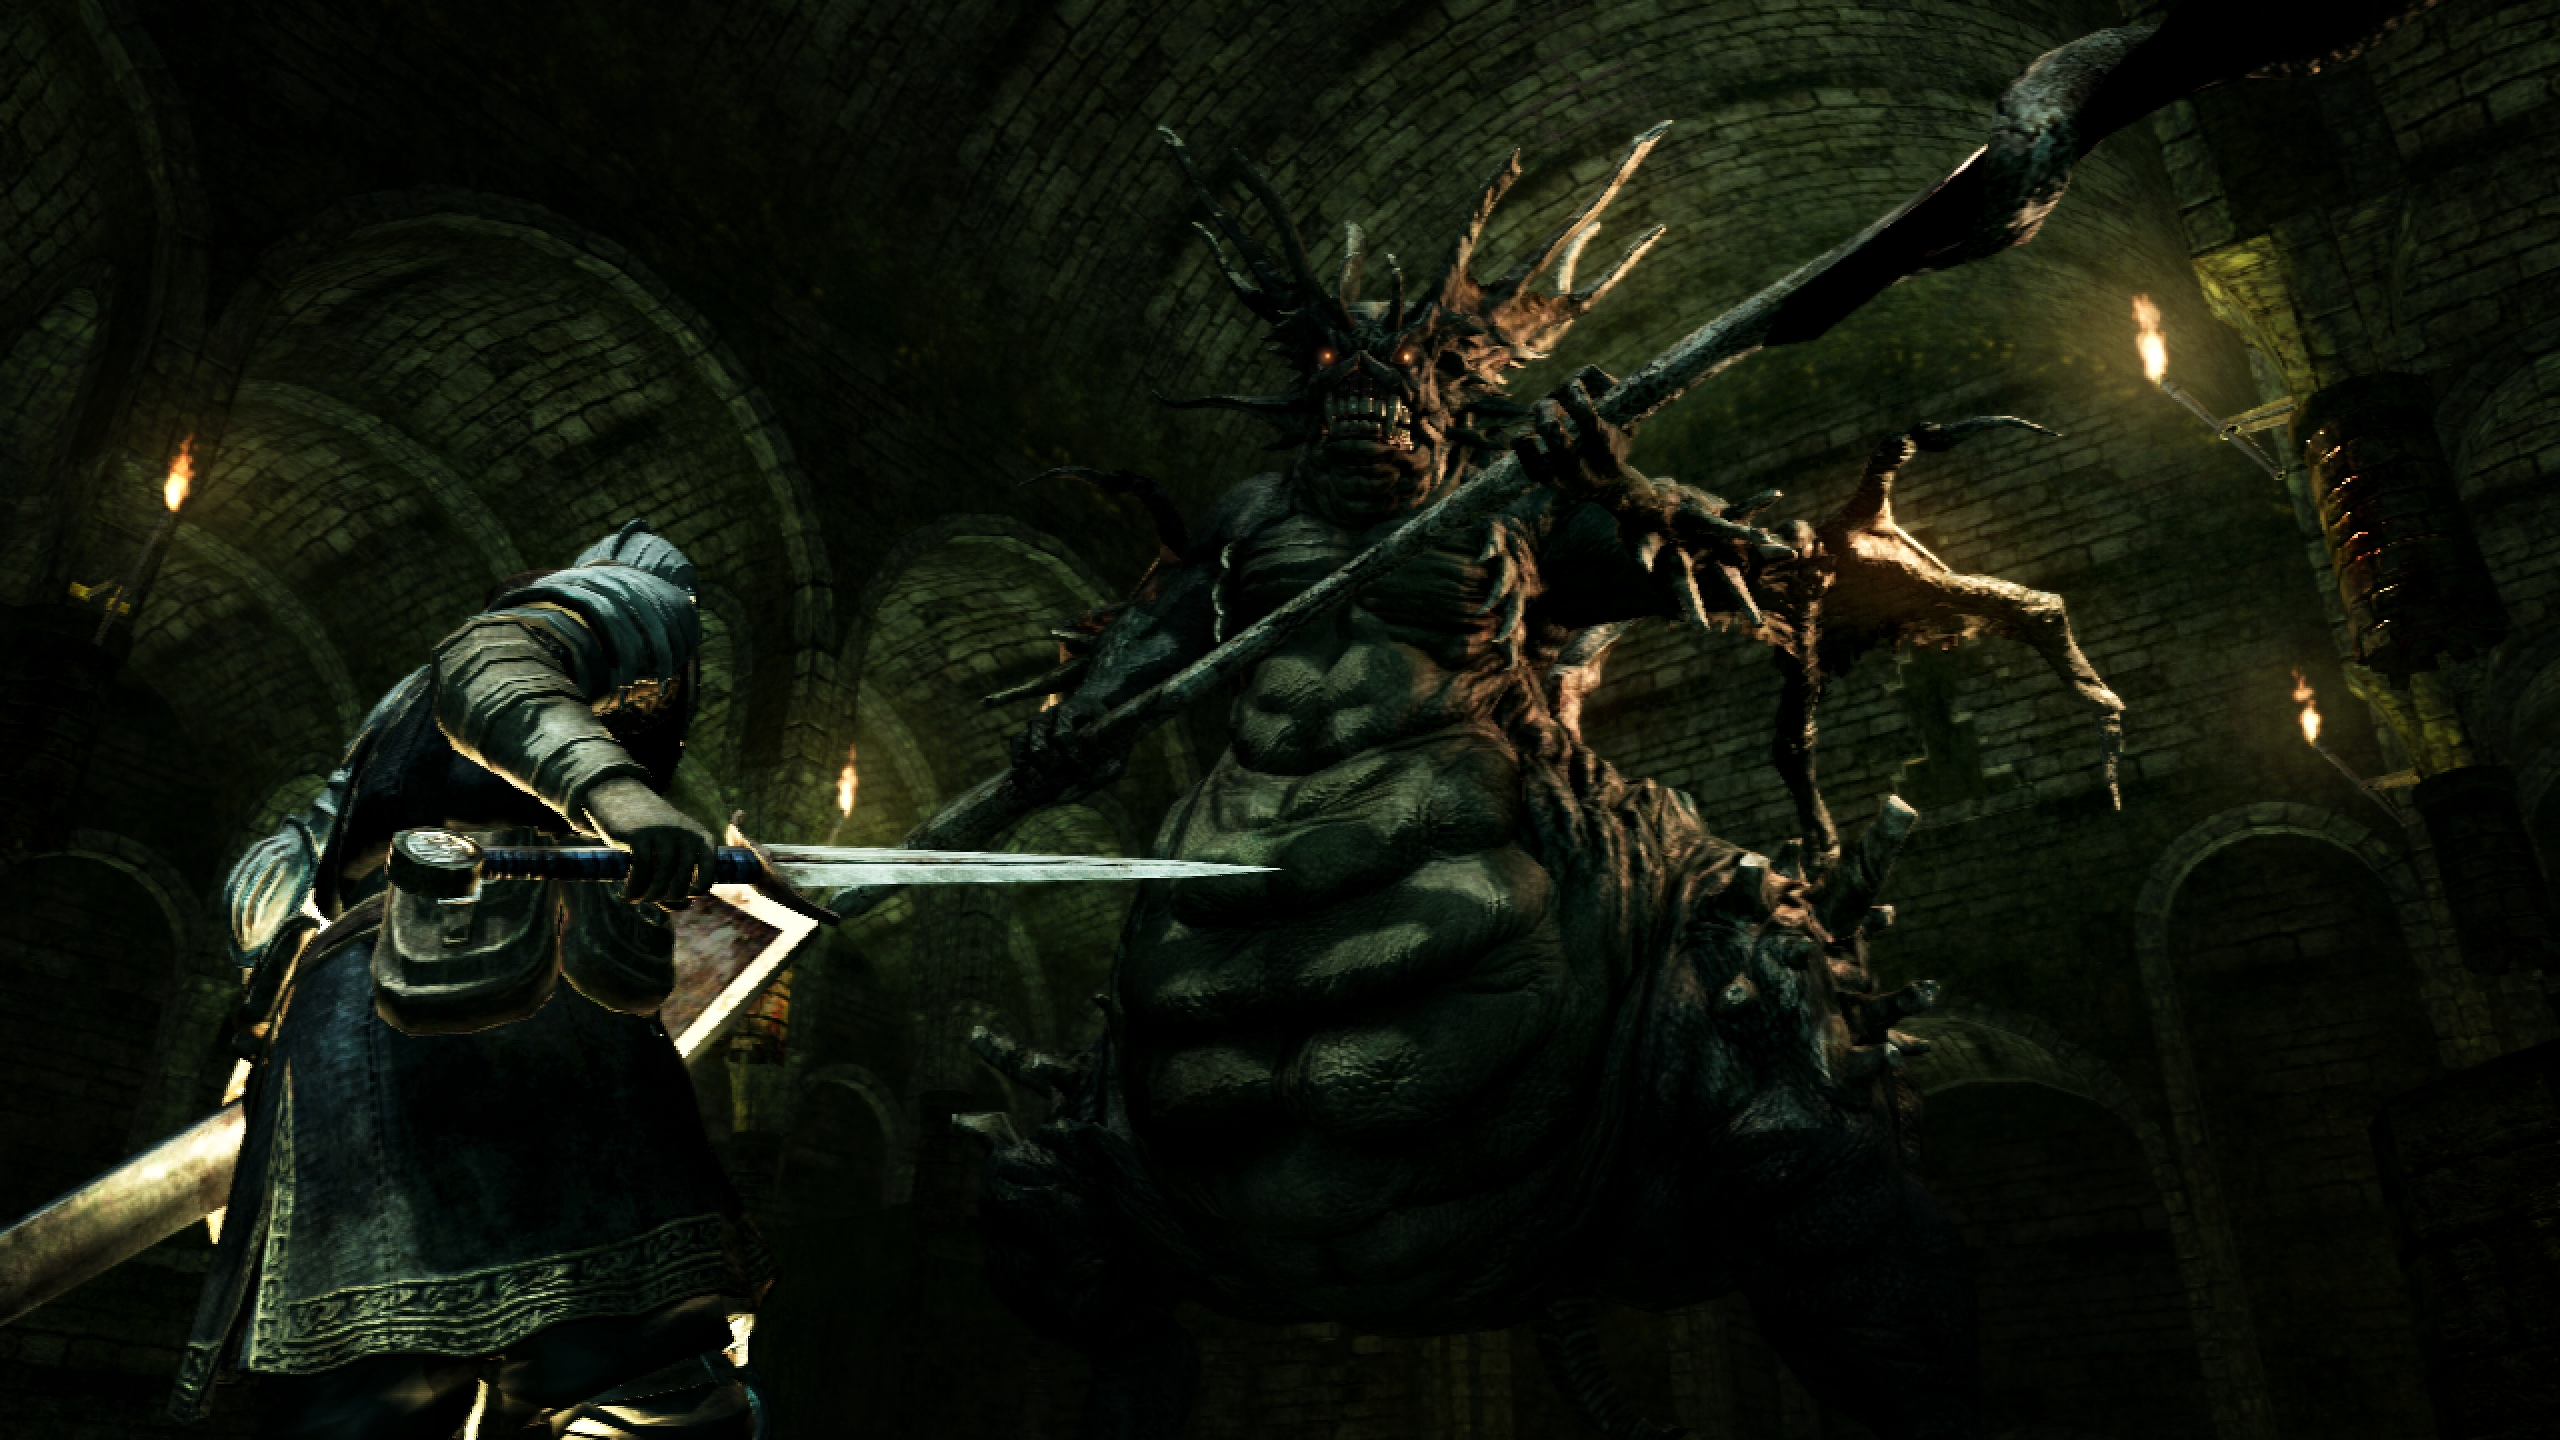 Dark Souls Backgrounds, Pictures, Images